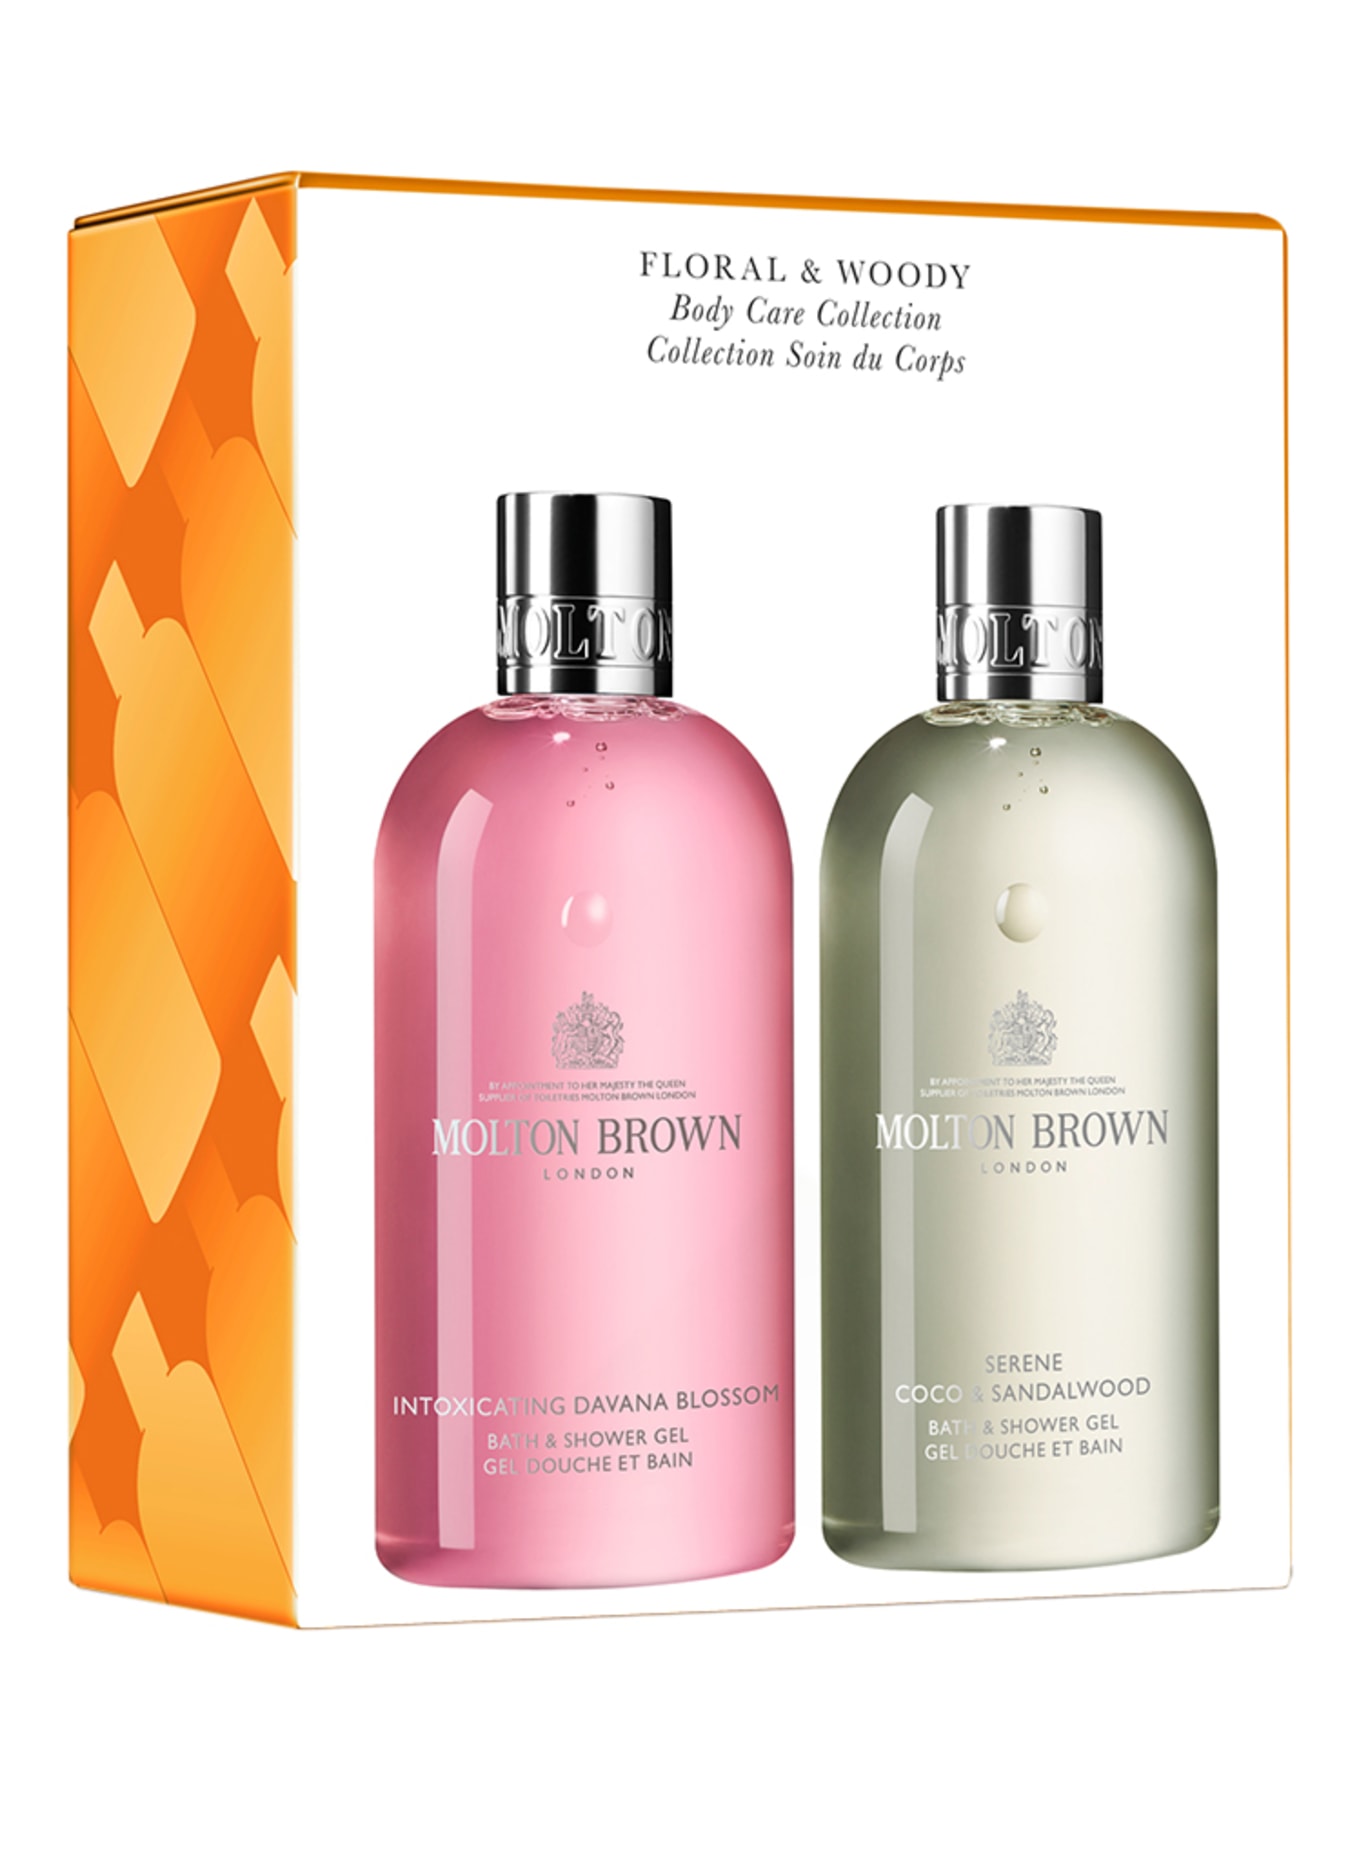 MOLTON BROWN FLORAL & WOODY BODY CARE COLLECTION (Obrazek 1)